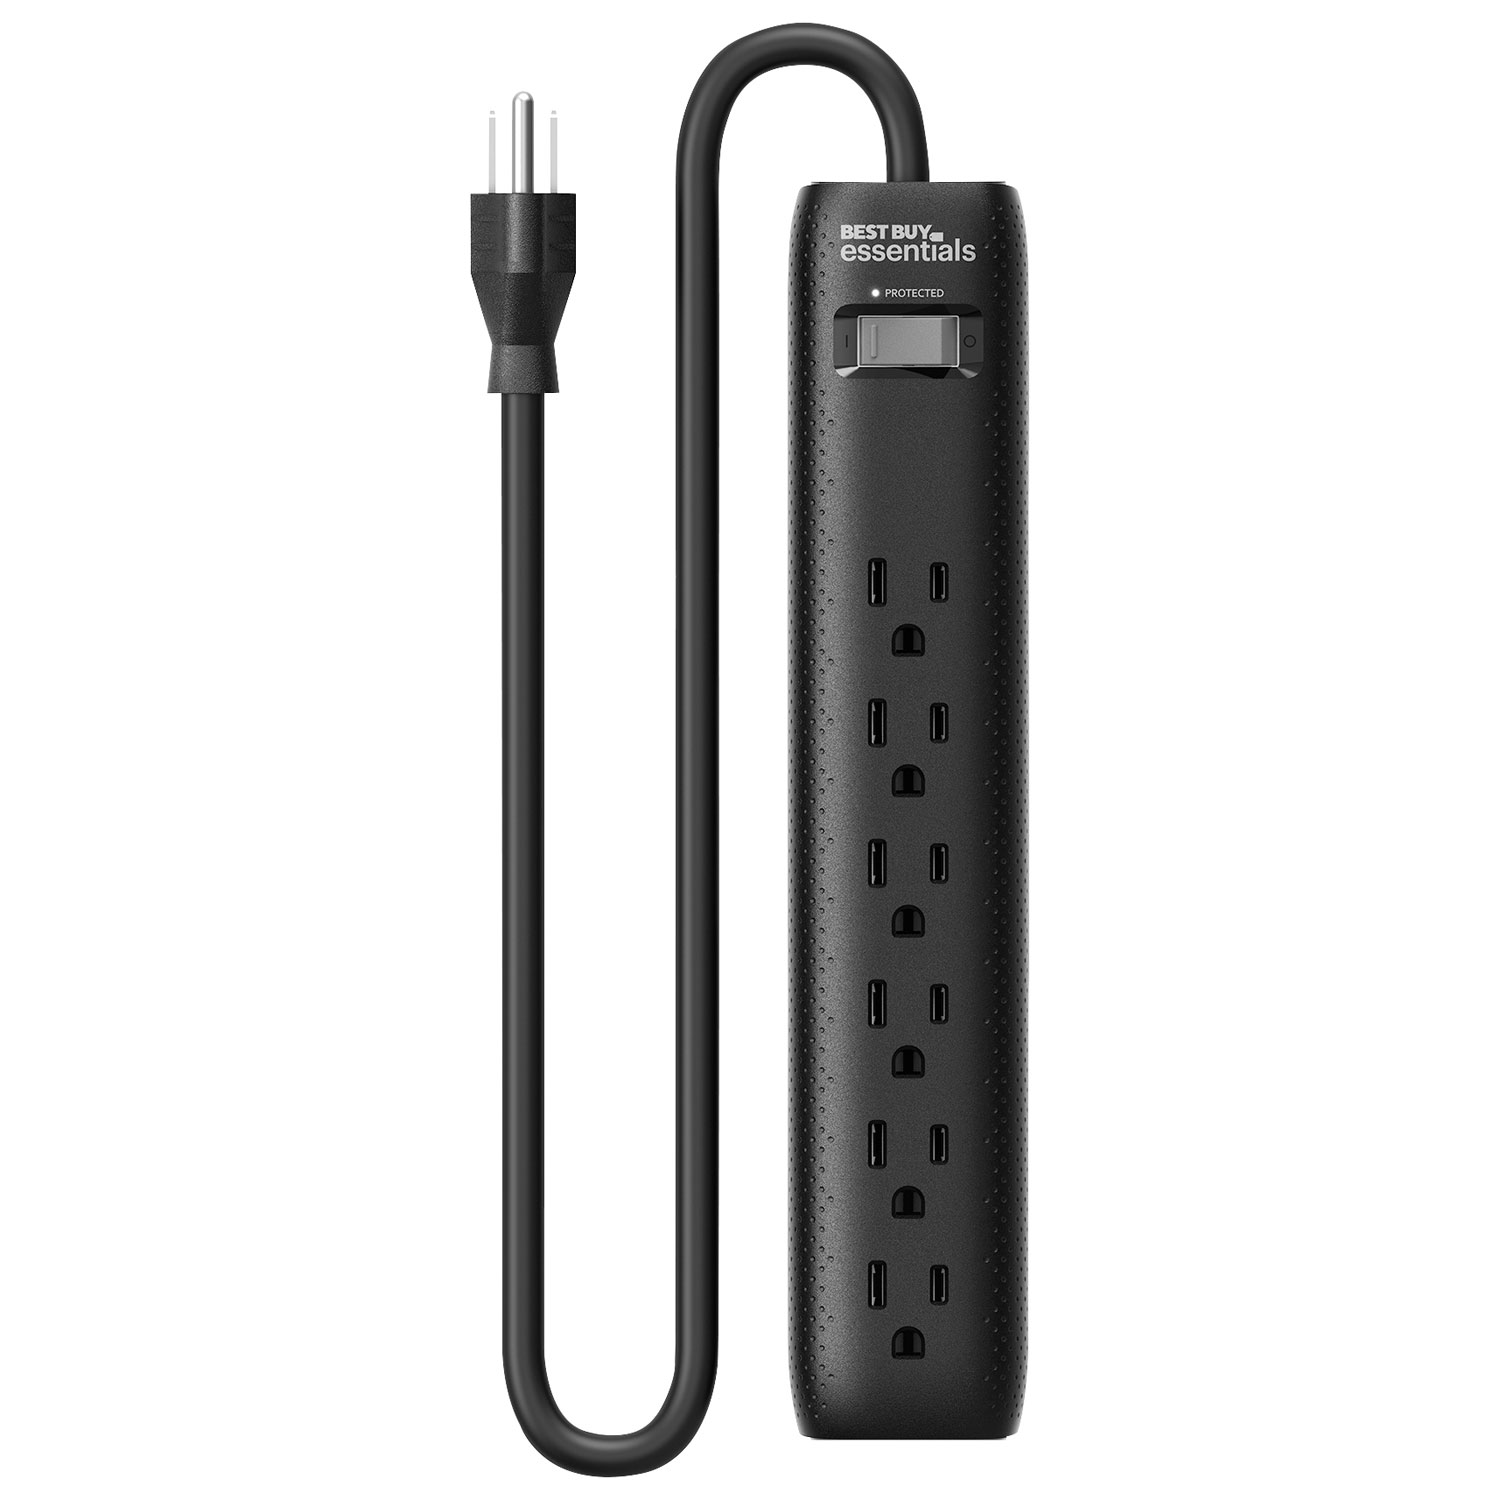 Best Buy Essentials 1080J 6-Outlet Surge Protector (BE-H206-C) - Only at Best Buy